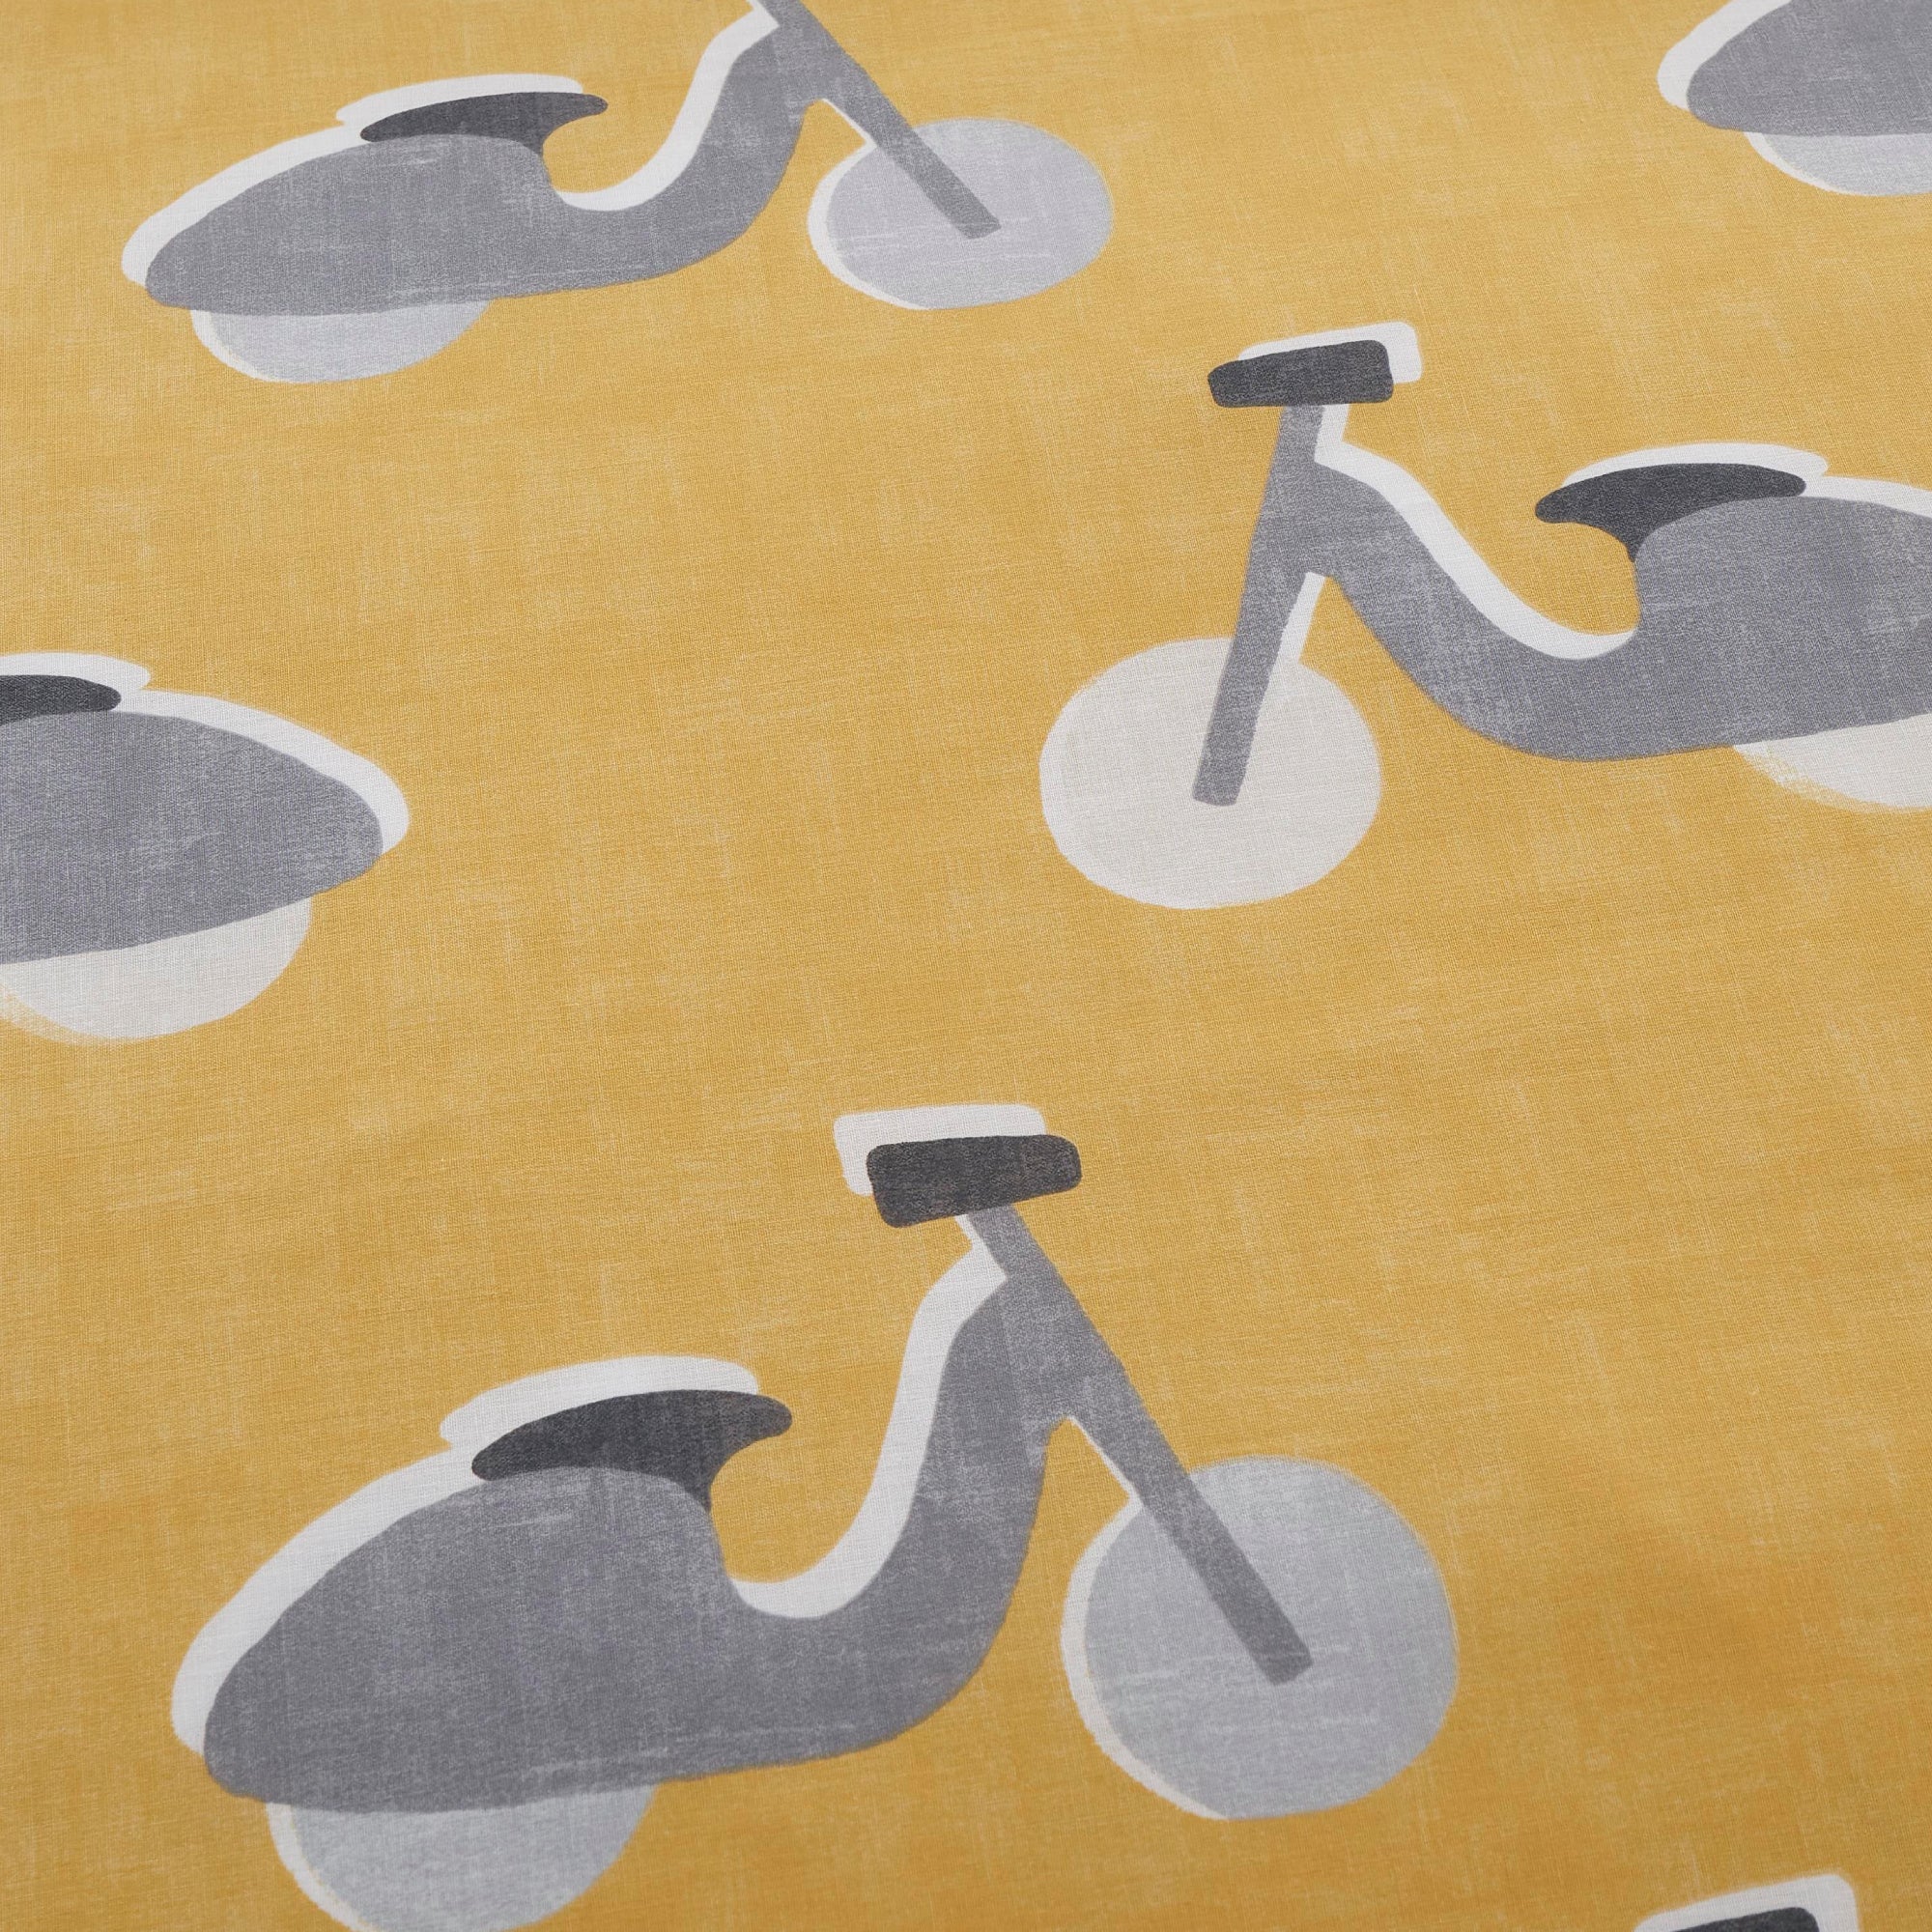 Duvet Cover Set Cool Cars by Bedlam in Duck Egg